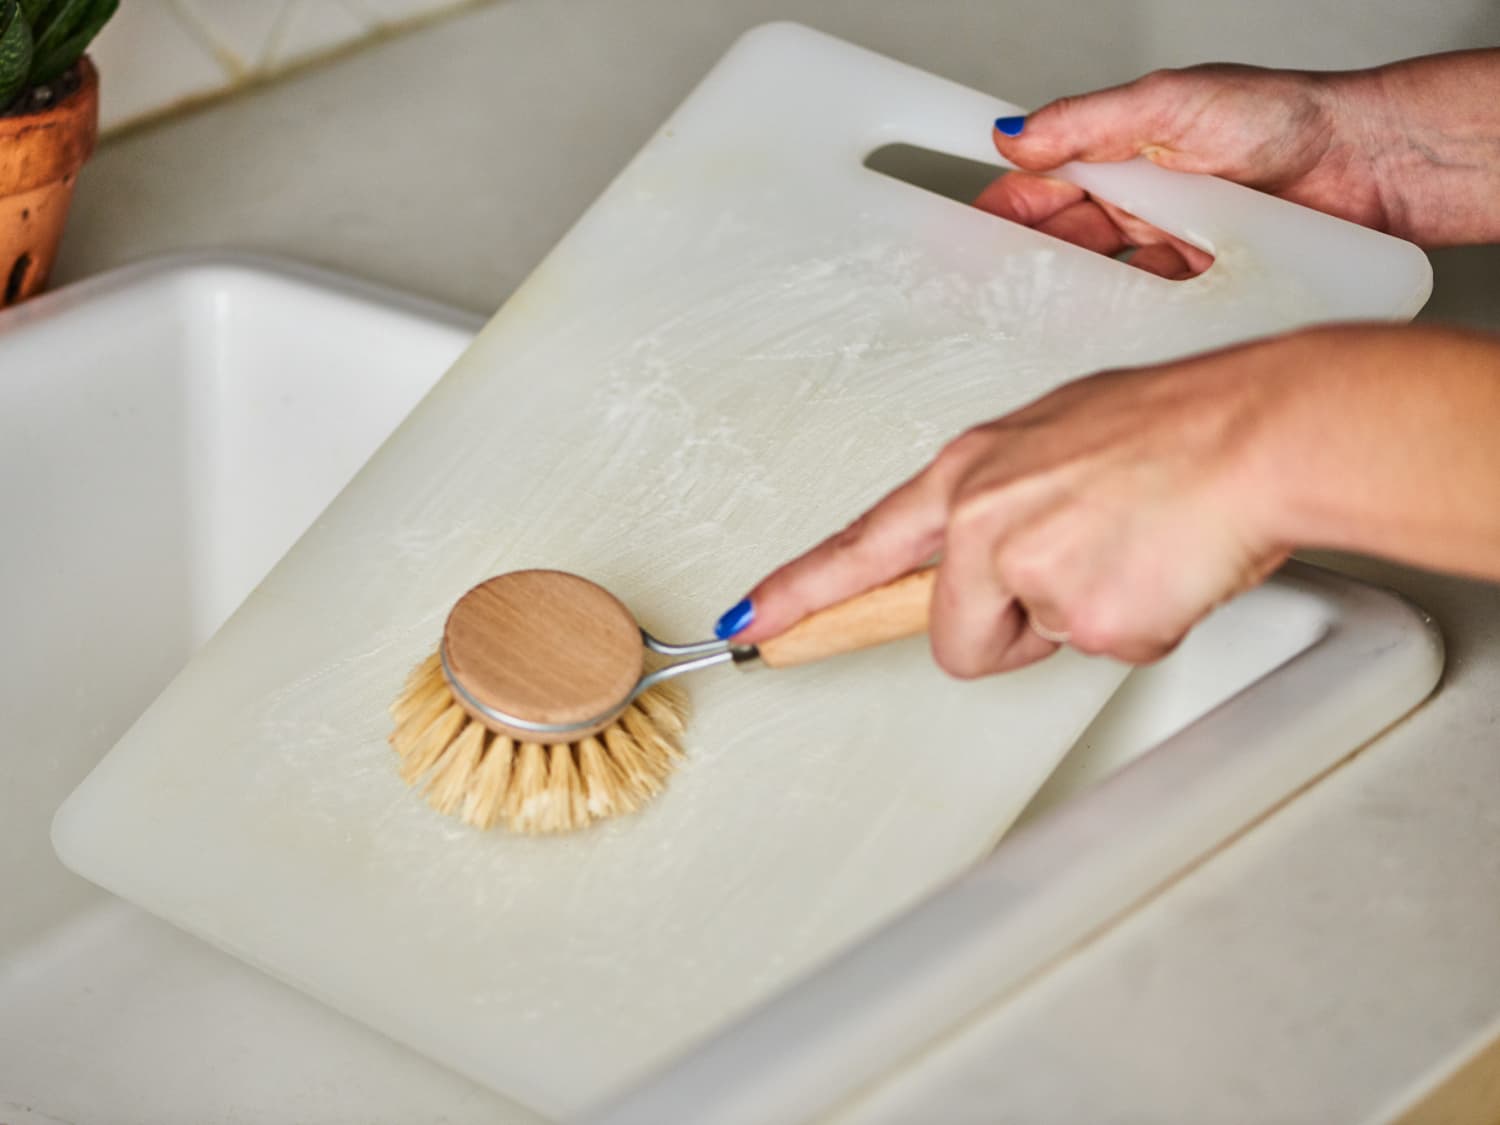 Surprise: Plastic Cutting Boards Shed Microplastics During Use